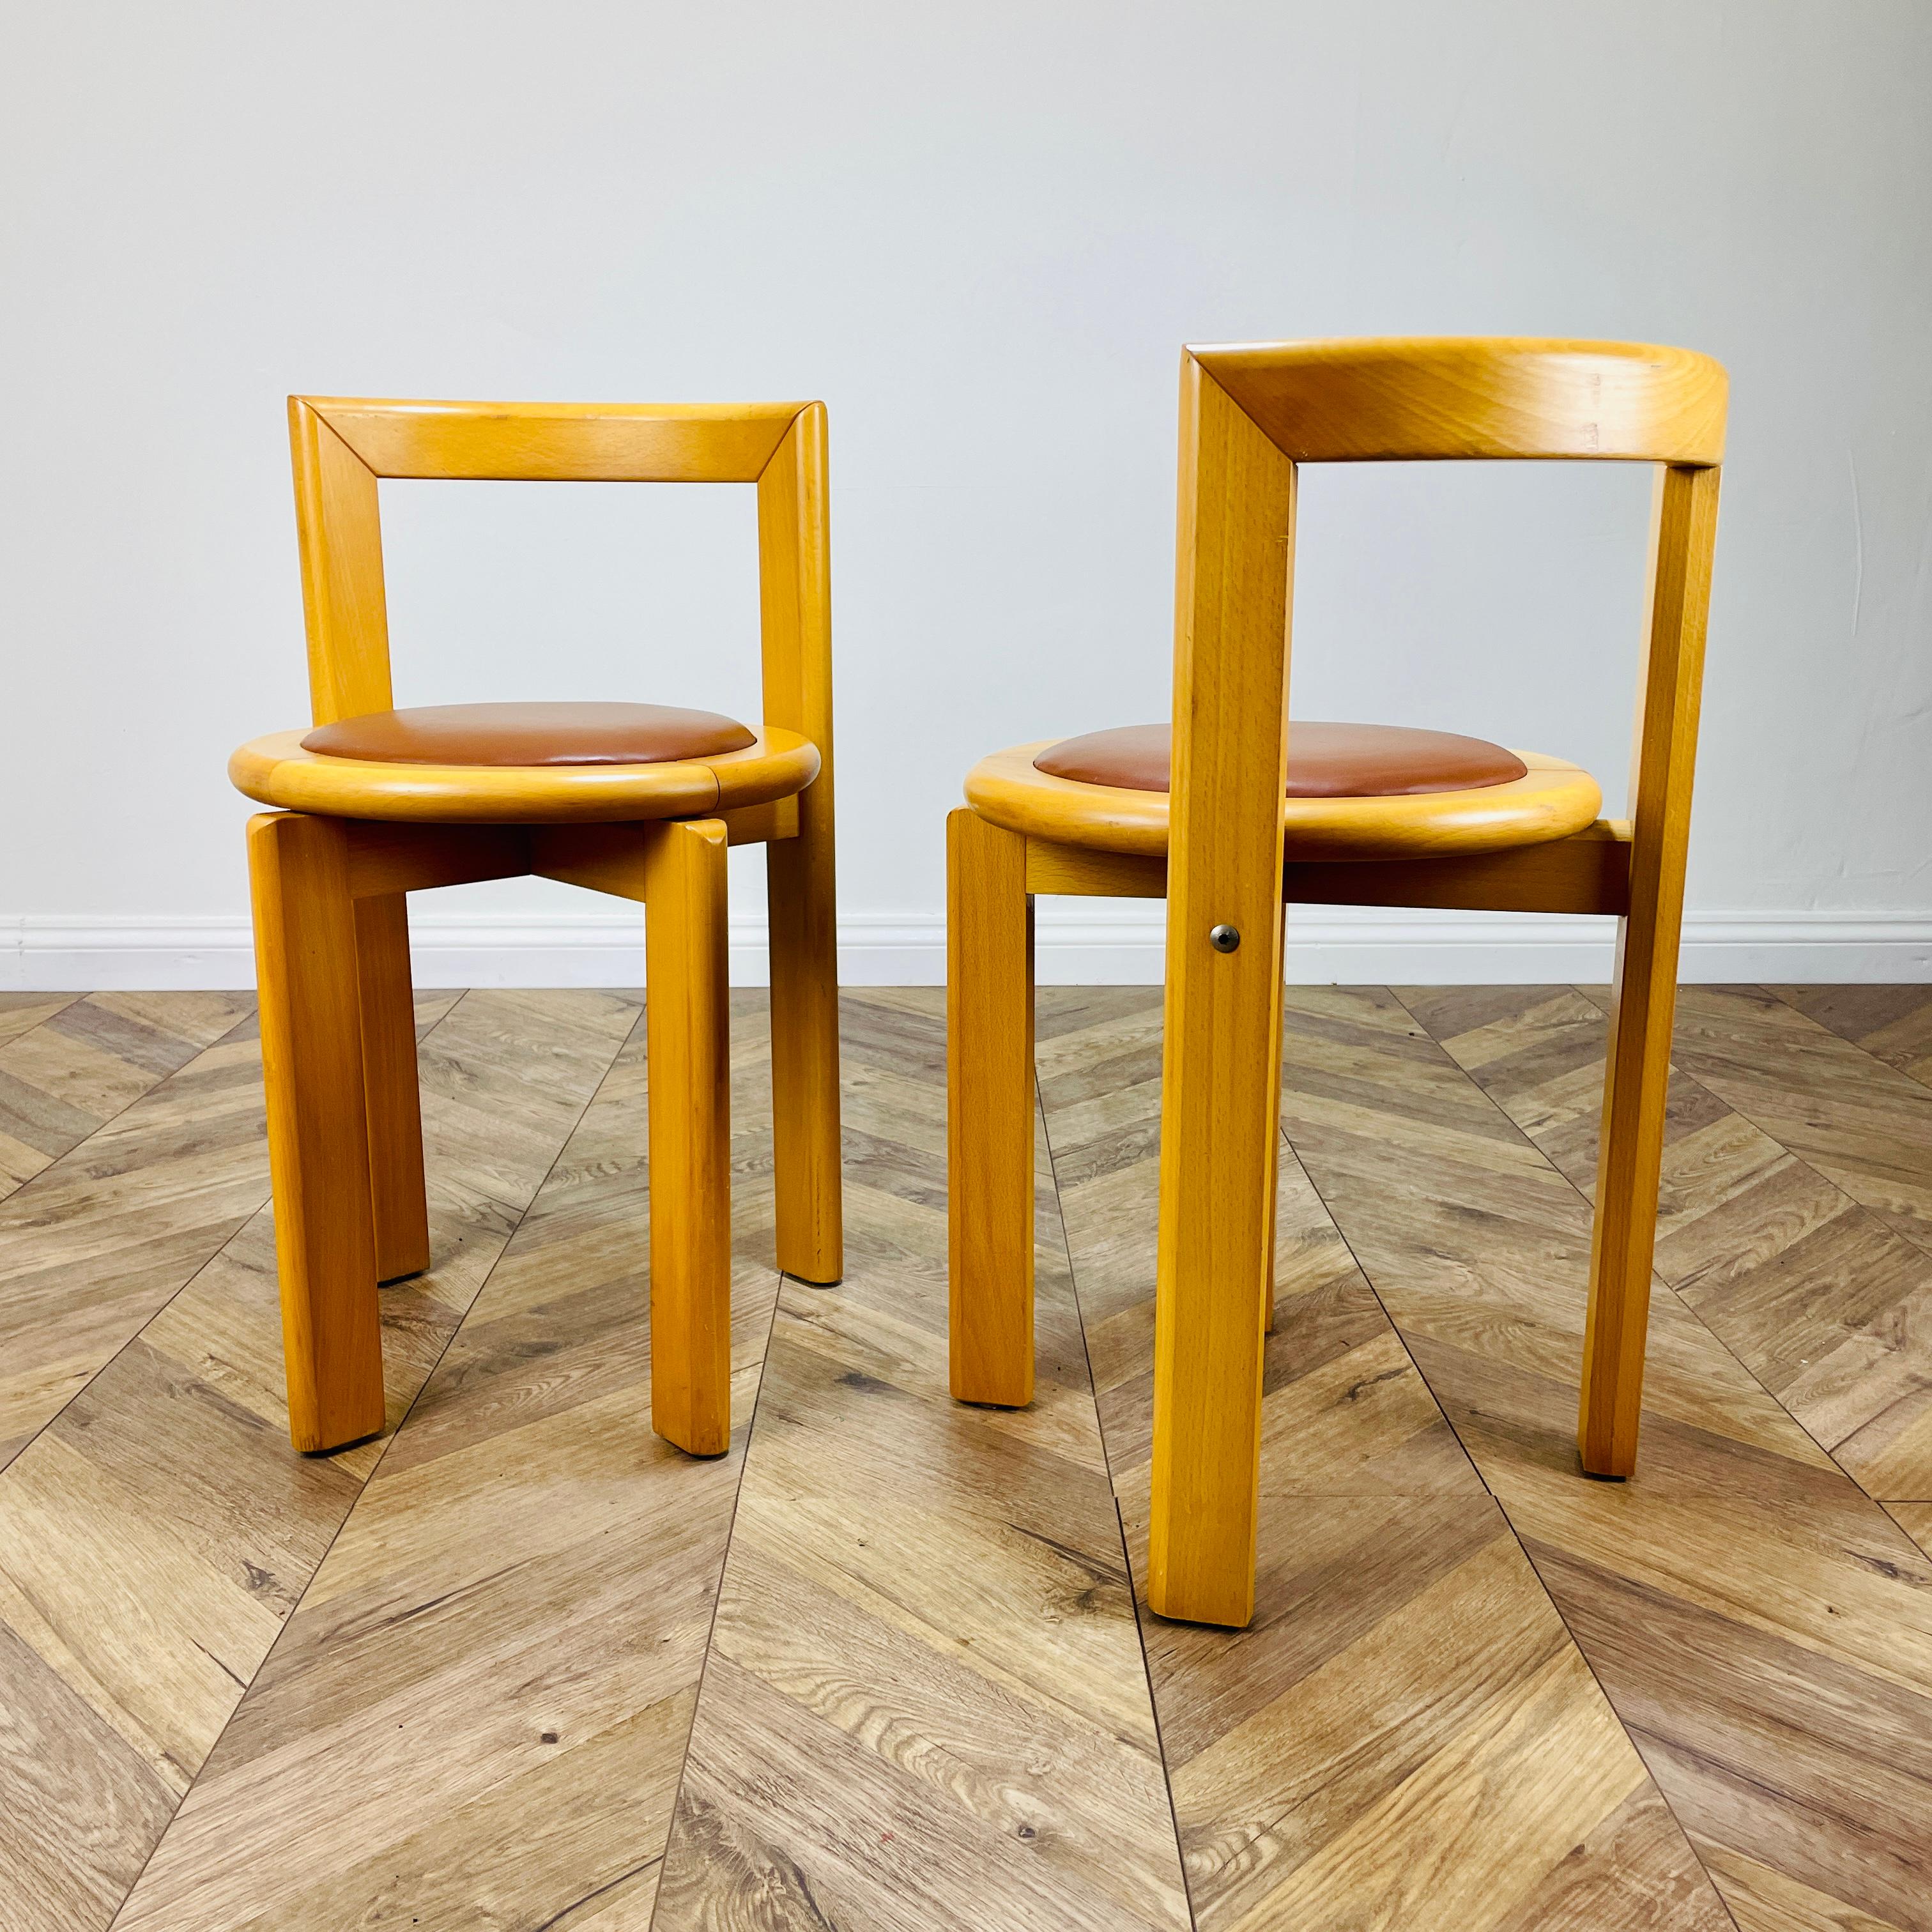 Post-Modern Modernist Chairs inspired by Bruno Rey, Made by Glimåkra of Sweden, Set of 2